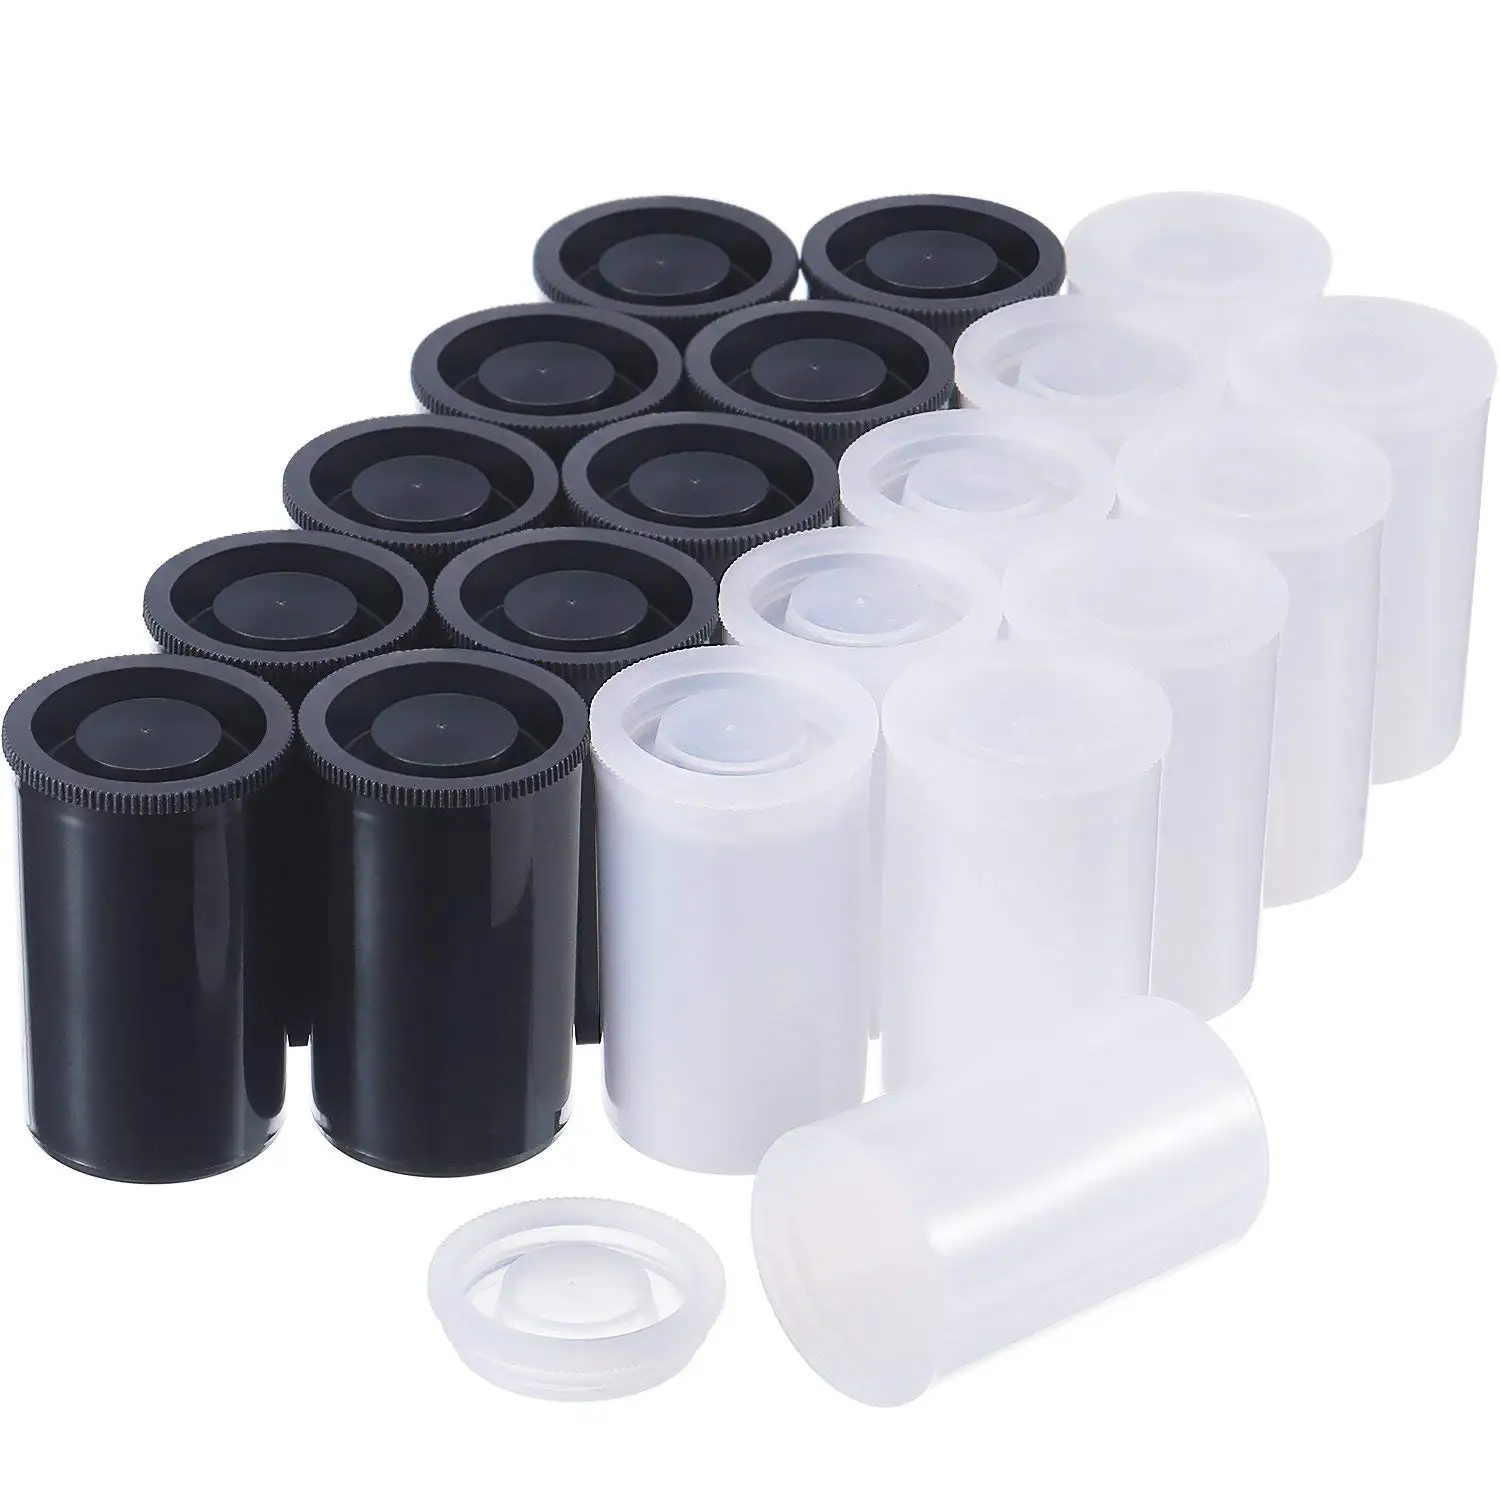 20PCS X 33MM Plastic Empty Film Canister Camera Reel Container Storage Case Can for Accessories Art Beads Coin Pill Fishing Bait